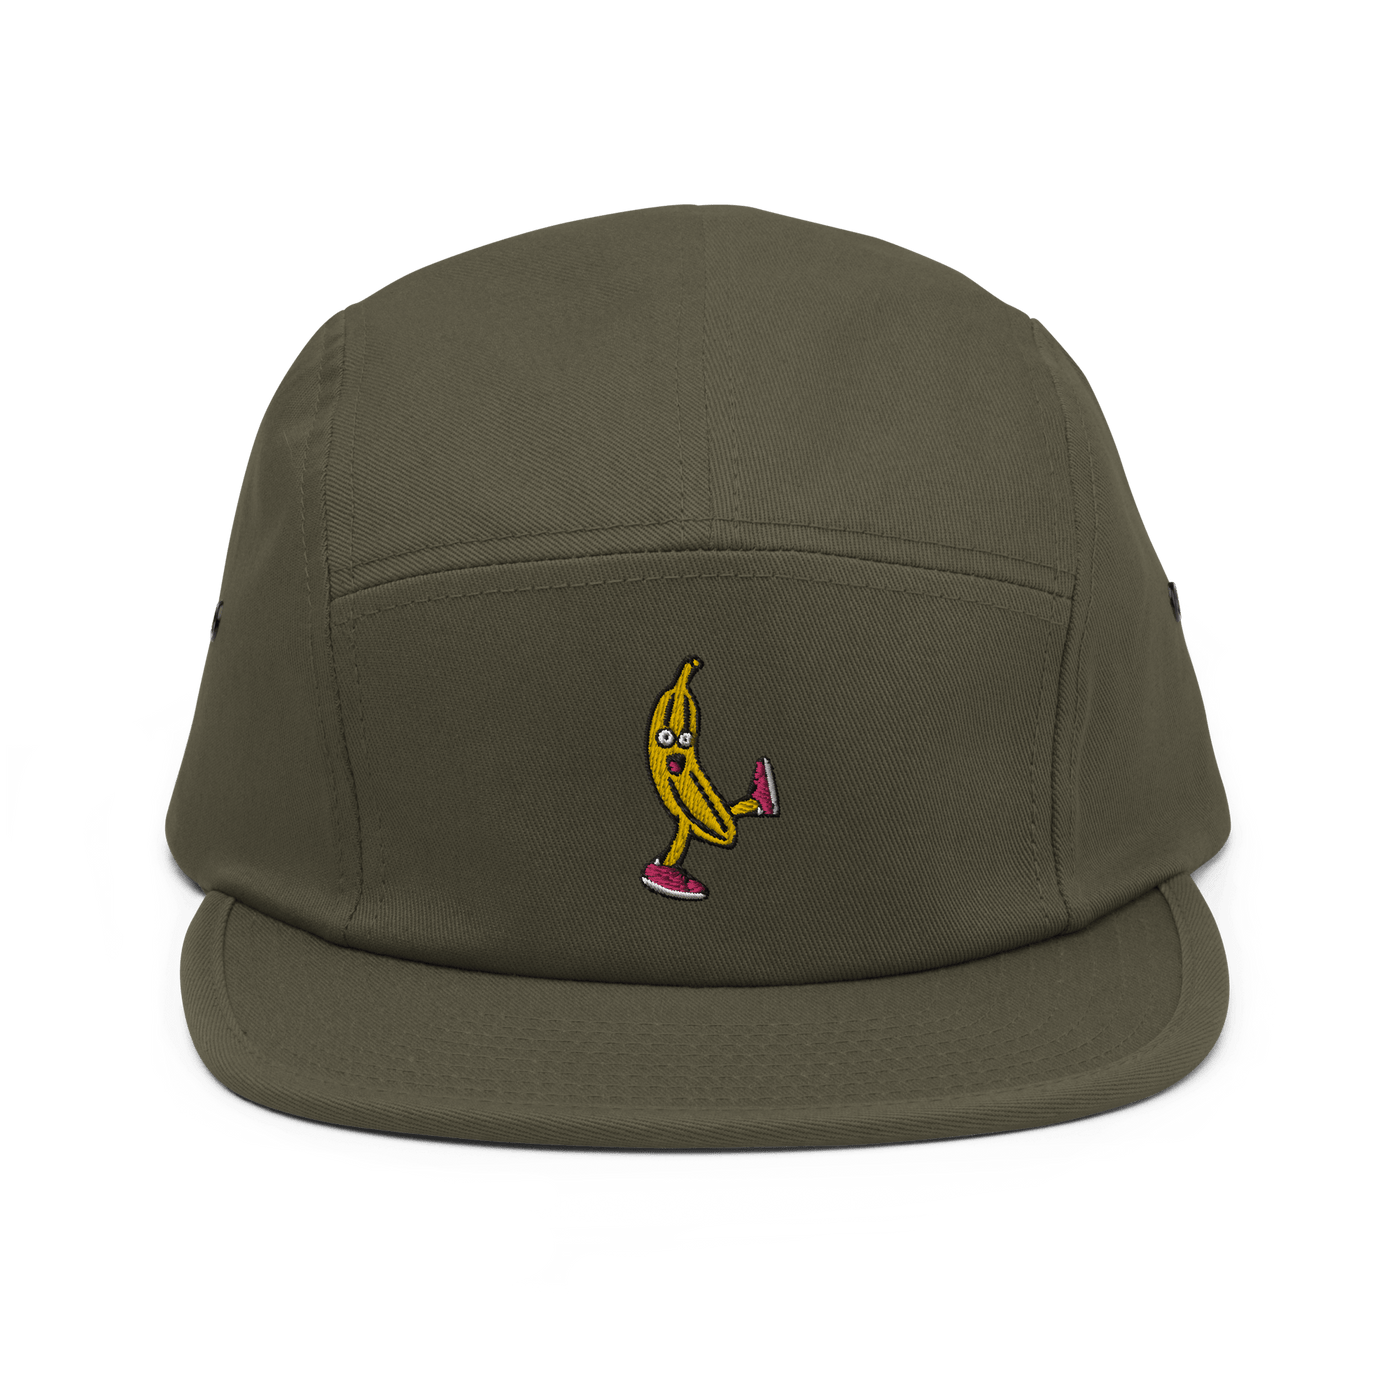 Drunk Banana Five Panel Cap - Olive - - Just Another Cap Store